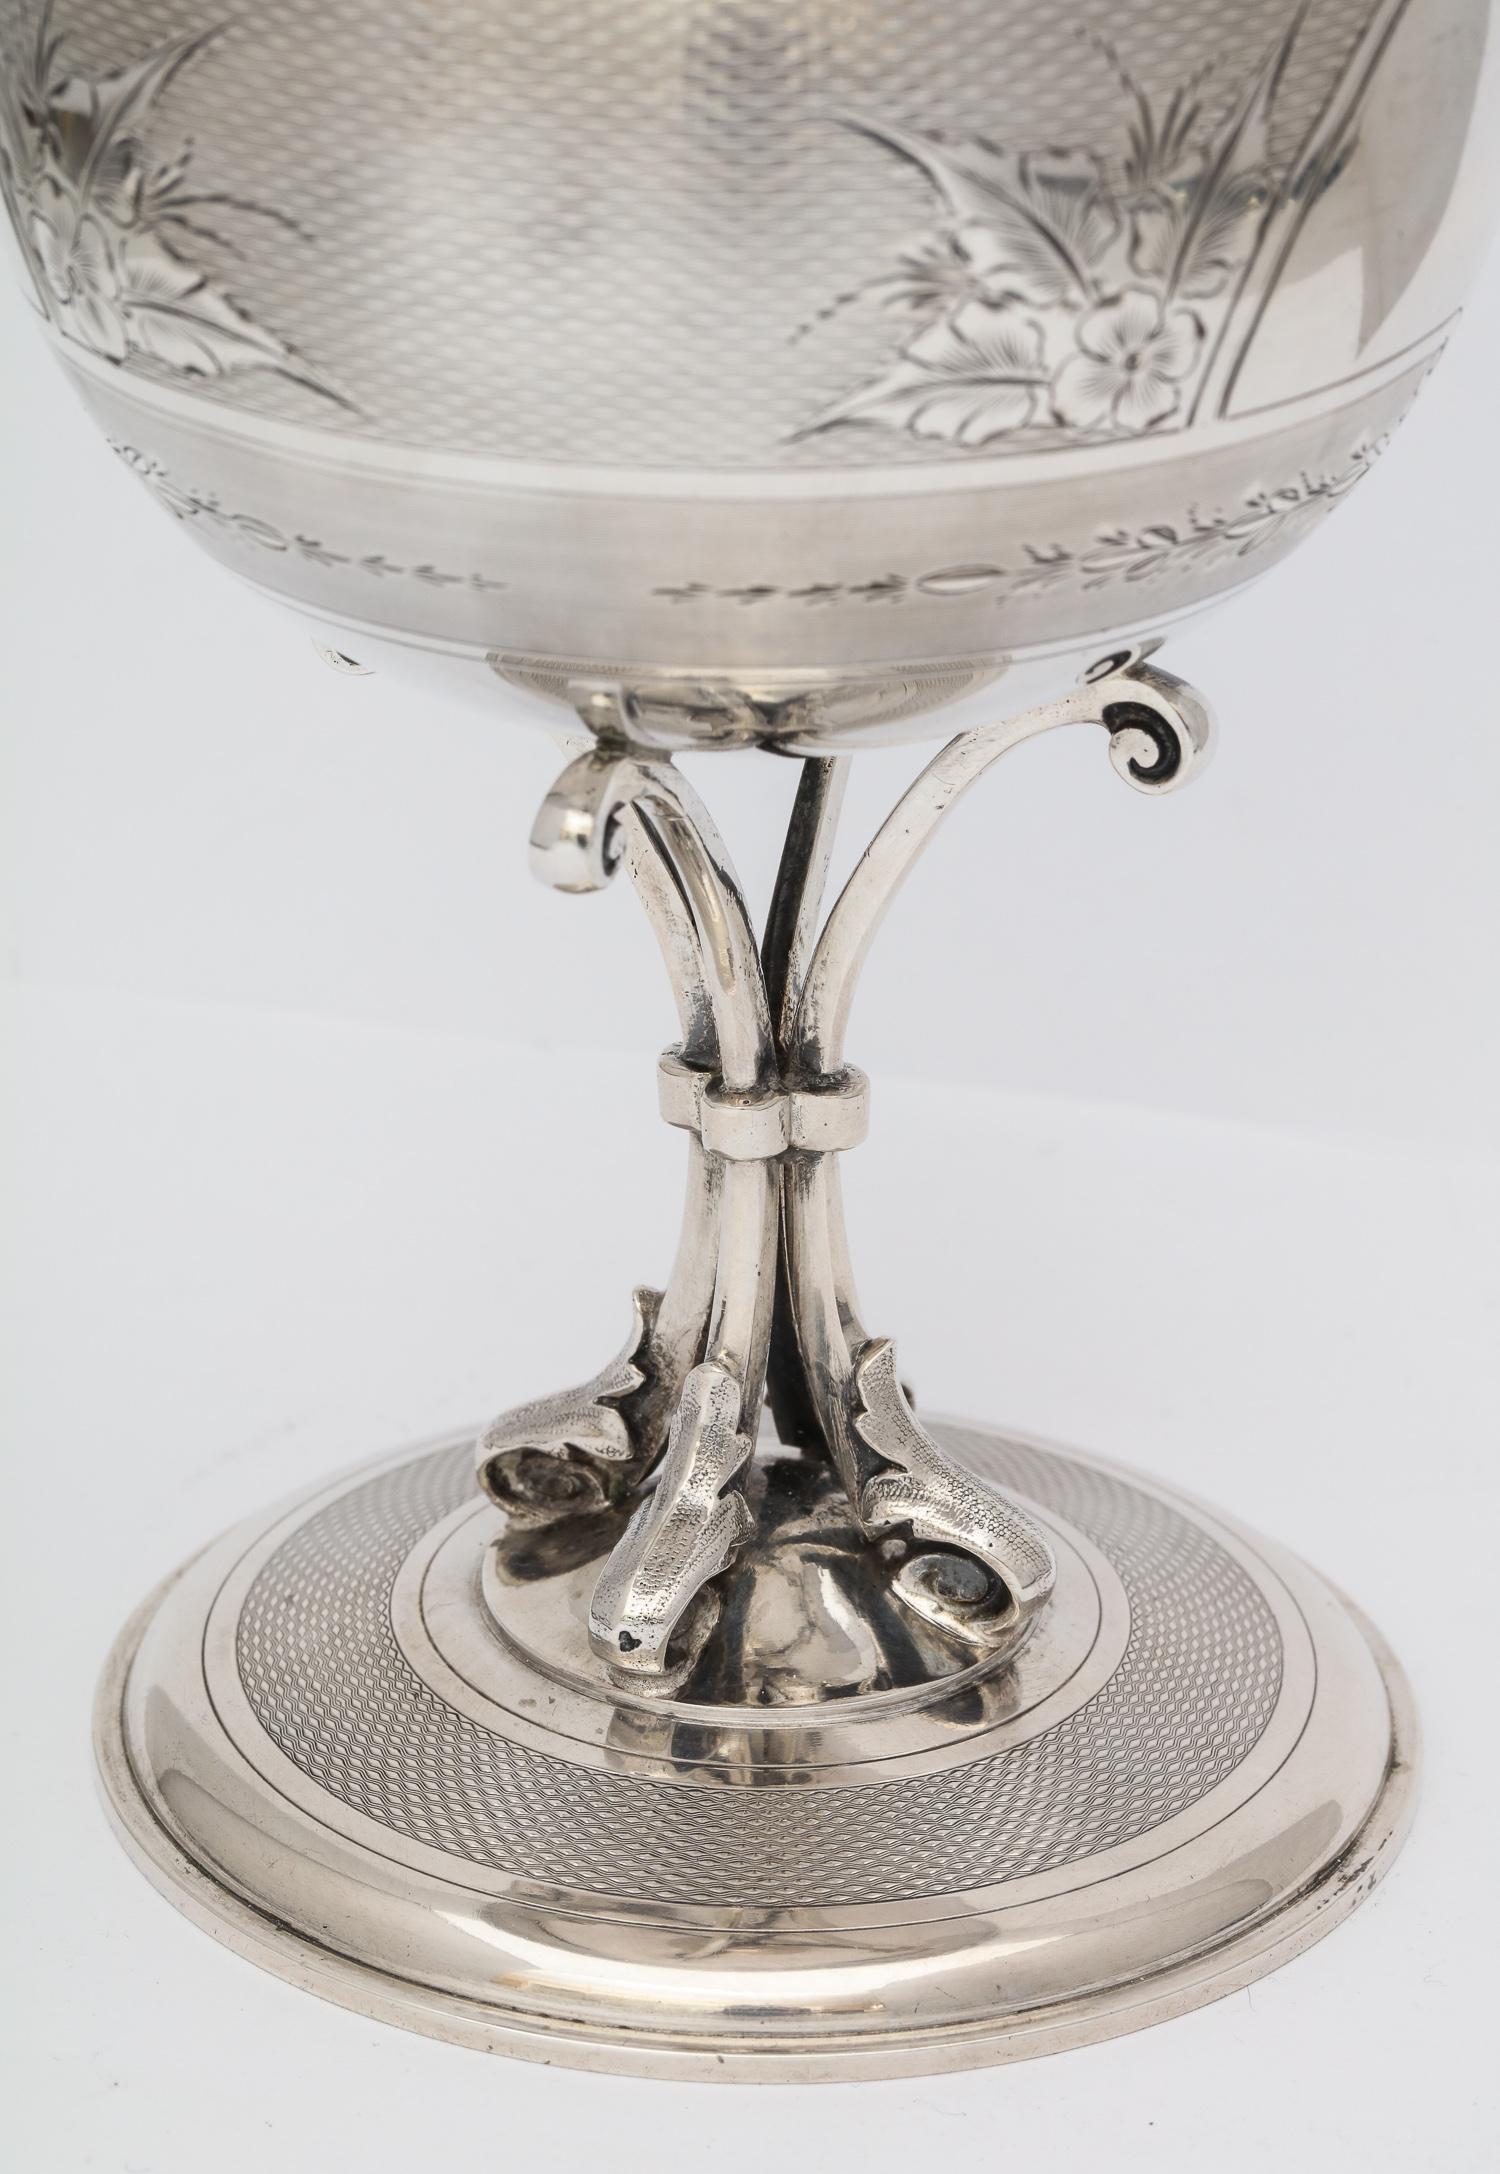 American, Neoclassical Coin Silver Vase by Gorham 1